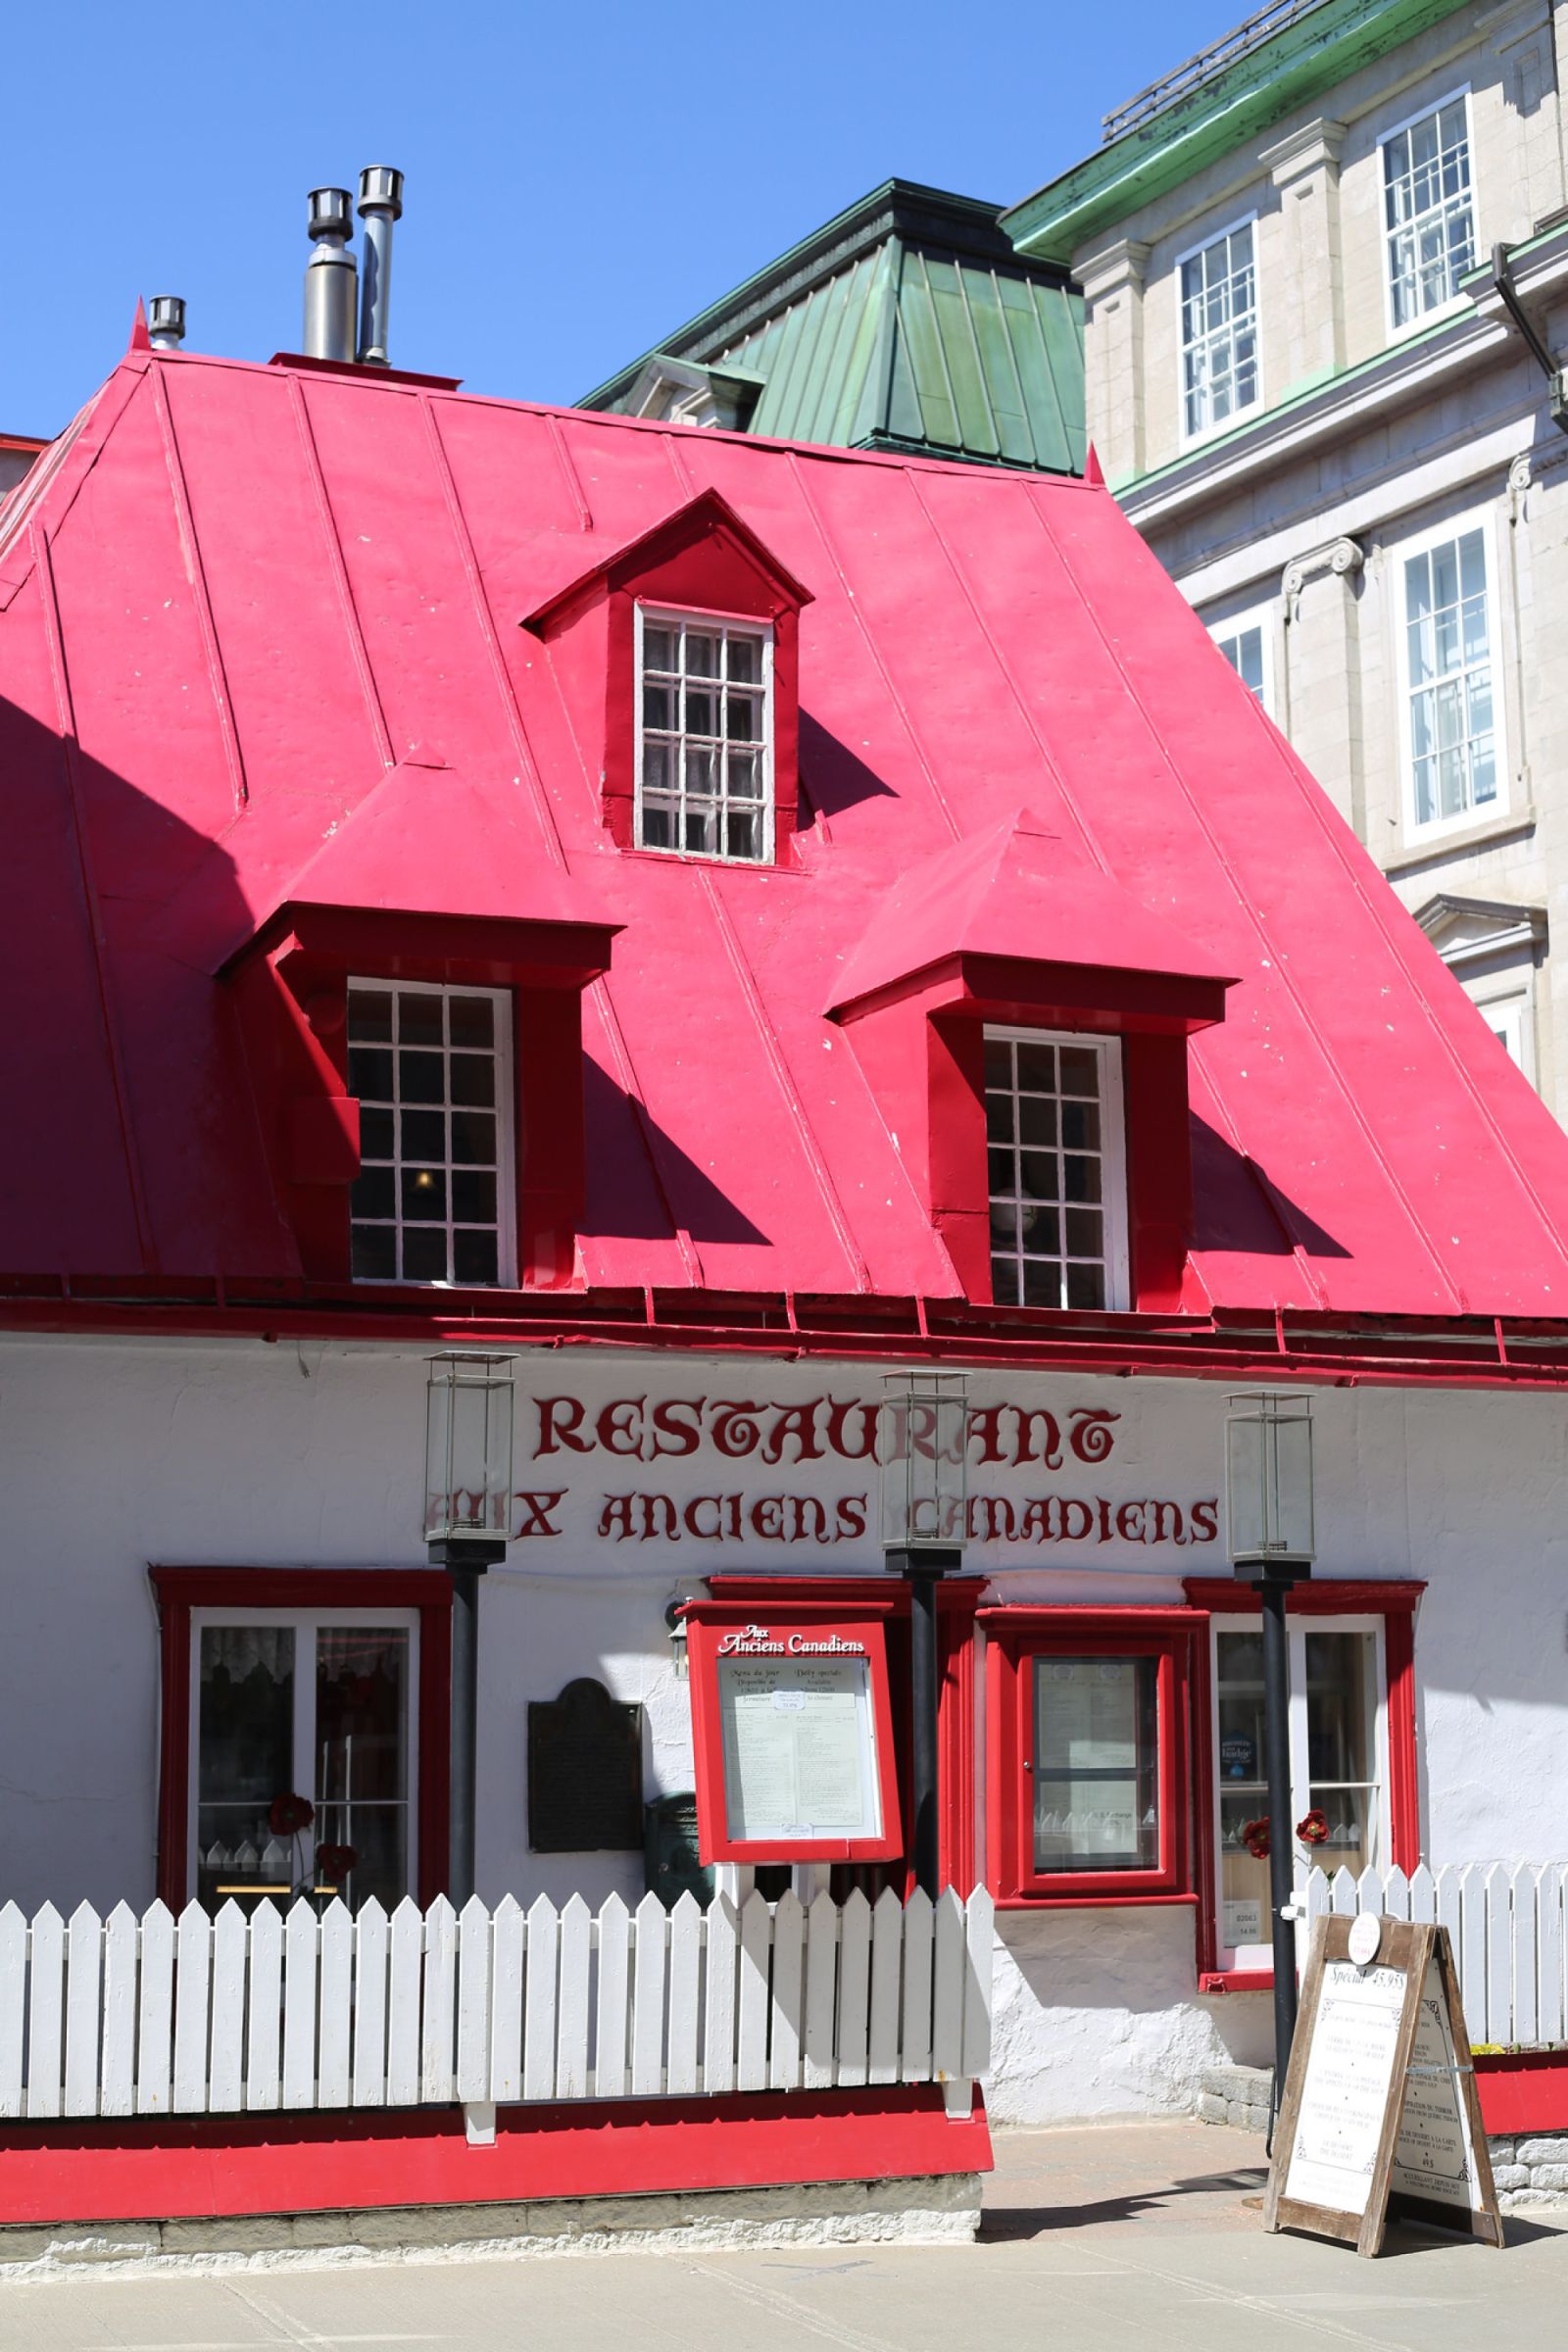 Restaurant with red roof in Quebec City